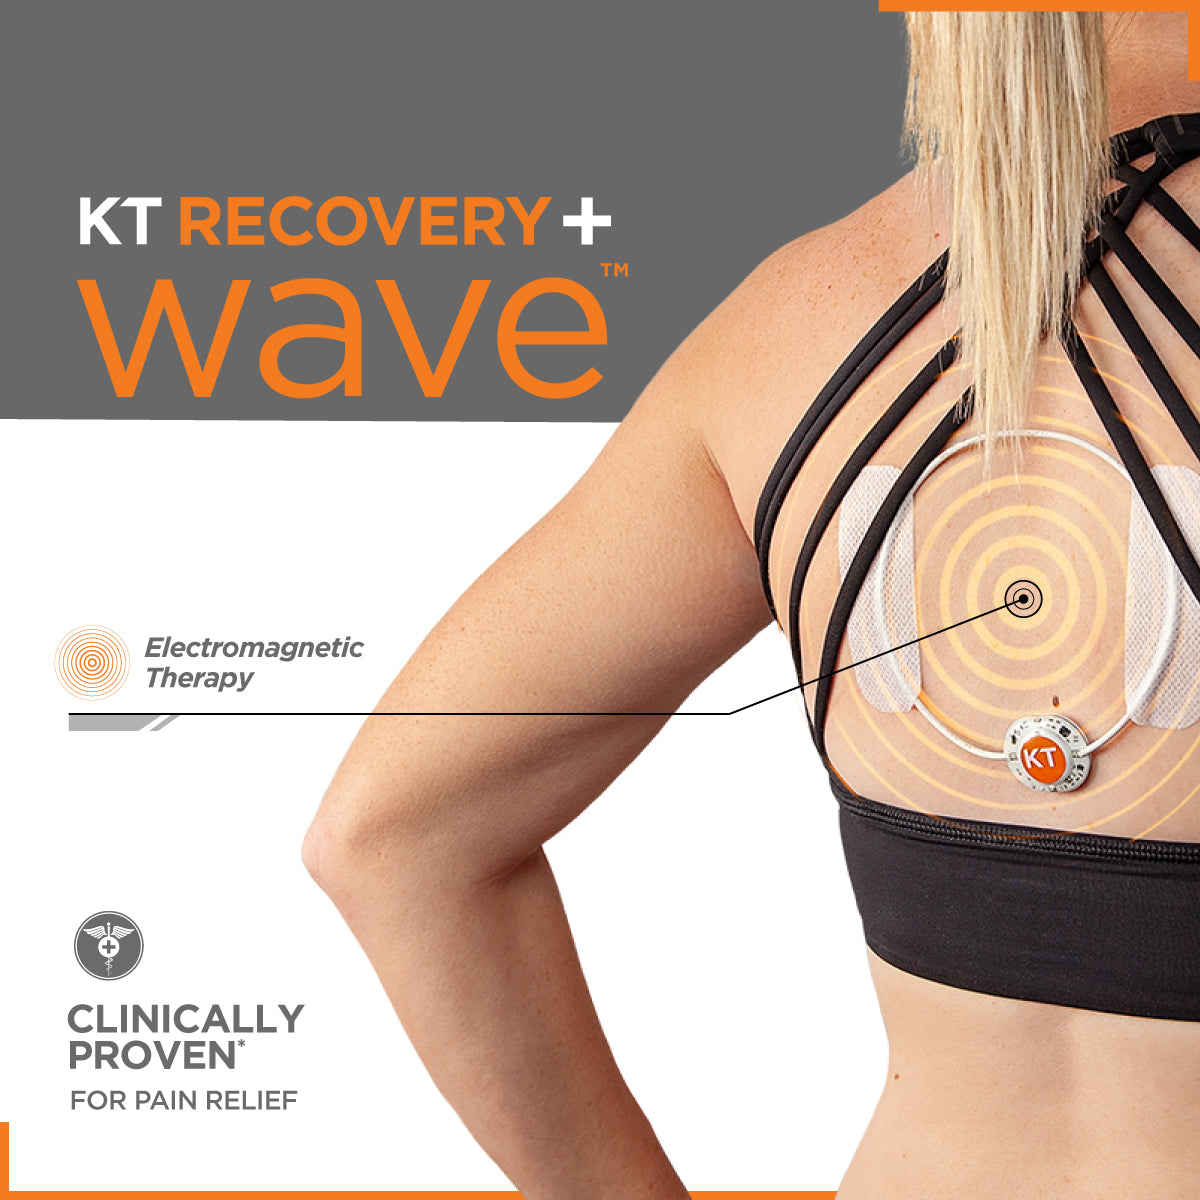 KT Recovery+ Wave™